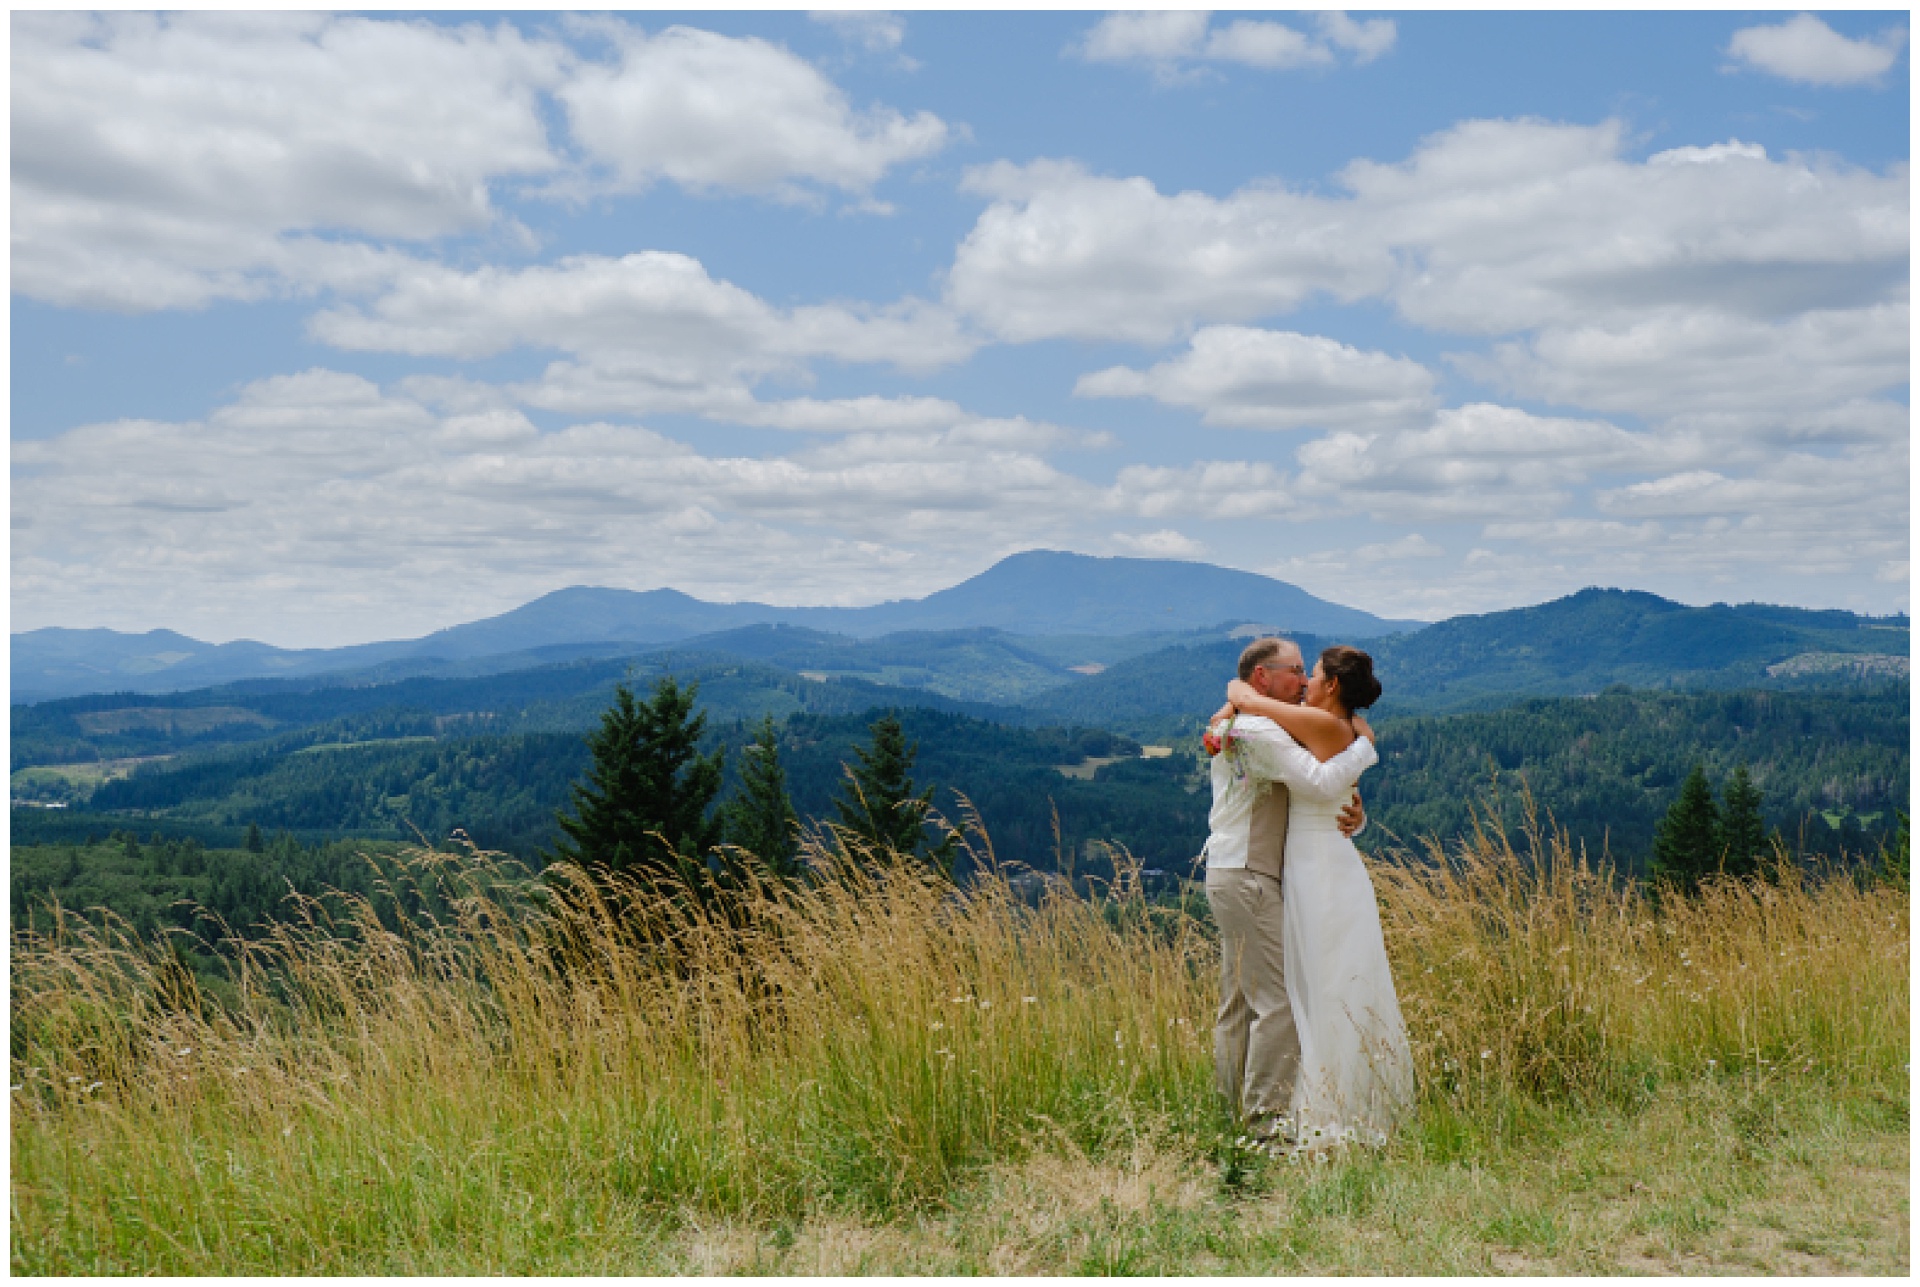 Bride and groom at a mountain wedding in Corvallis Oregon.